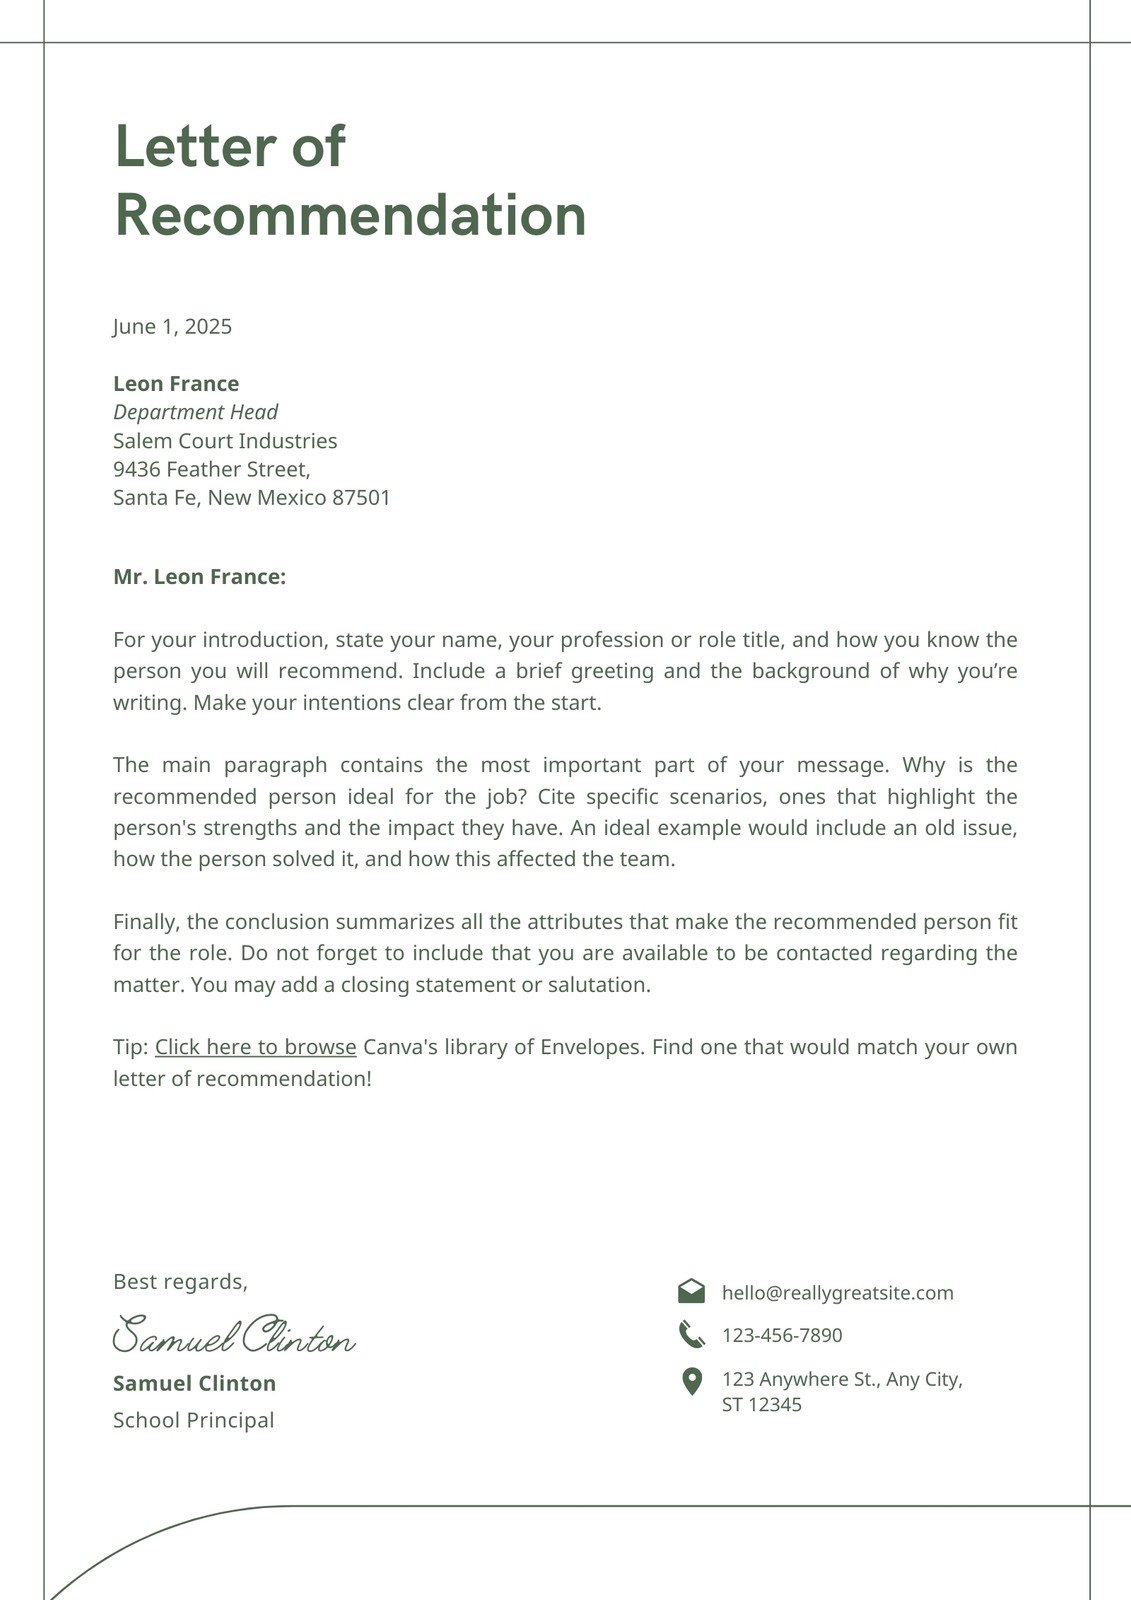 personal recommendation letter